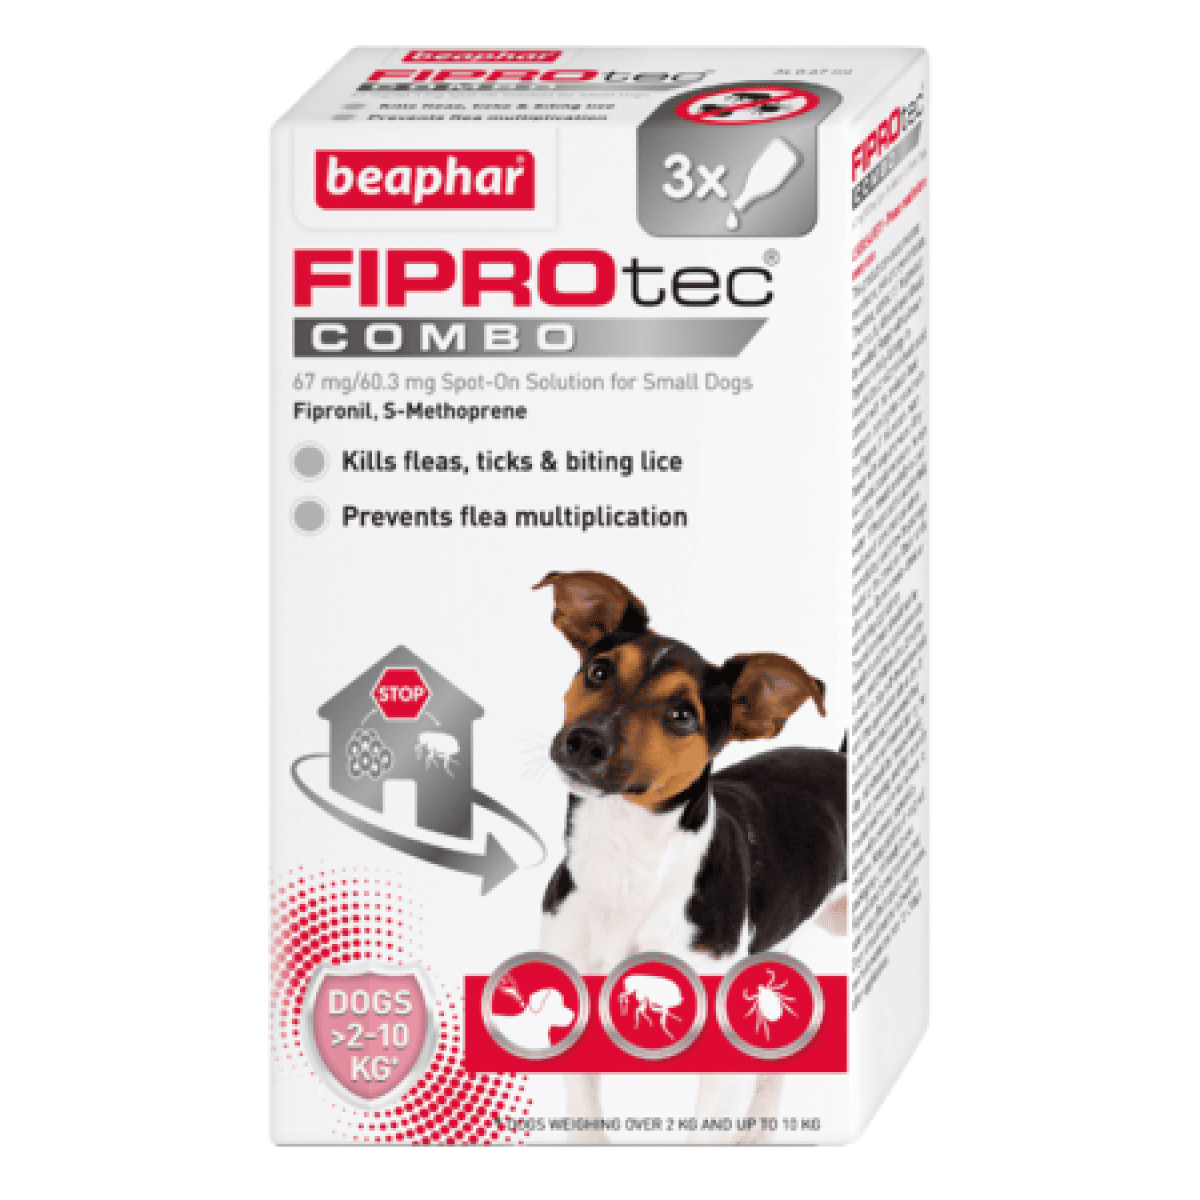 Beaphar – FIPROtec Combo Small Dog x 3 – Pawfect Supplies Ltd Product Image